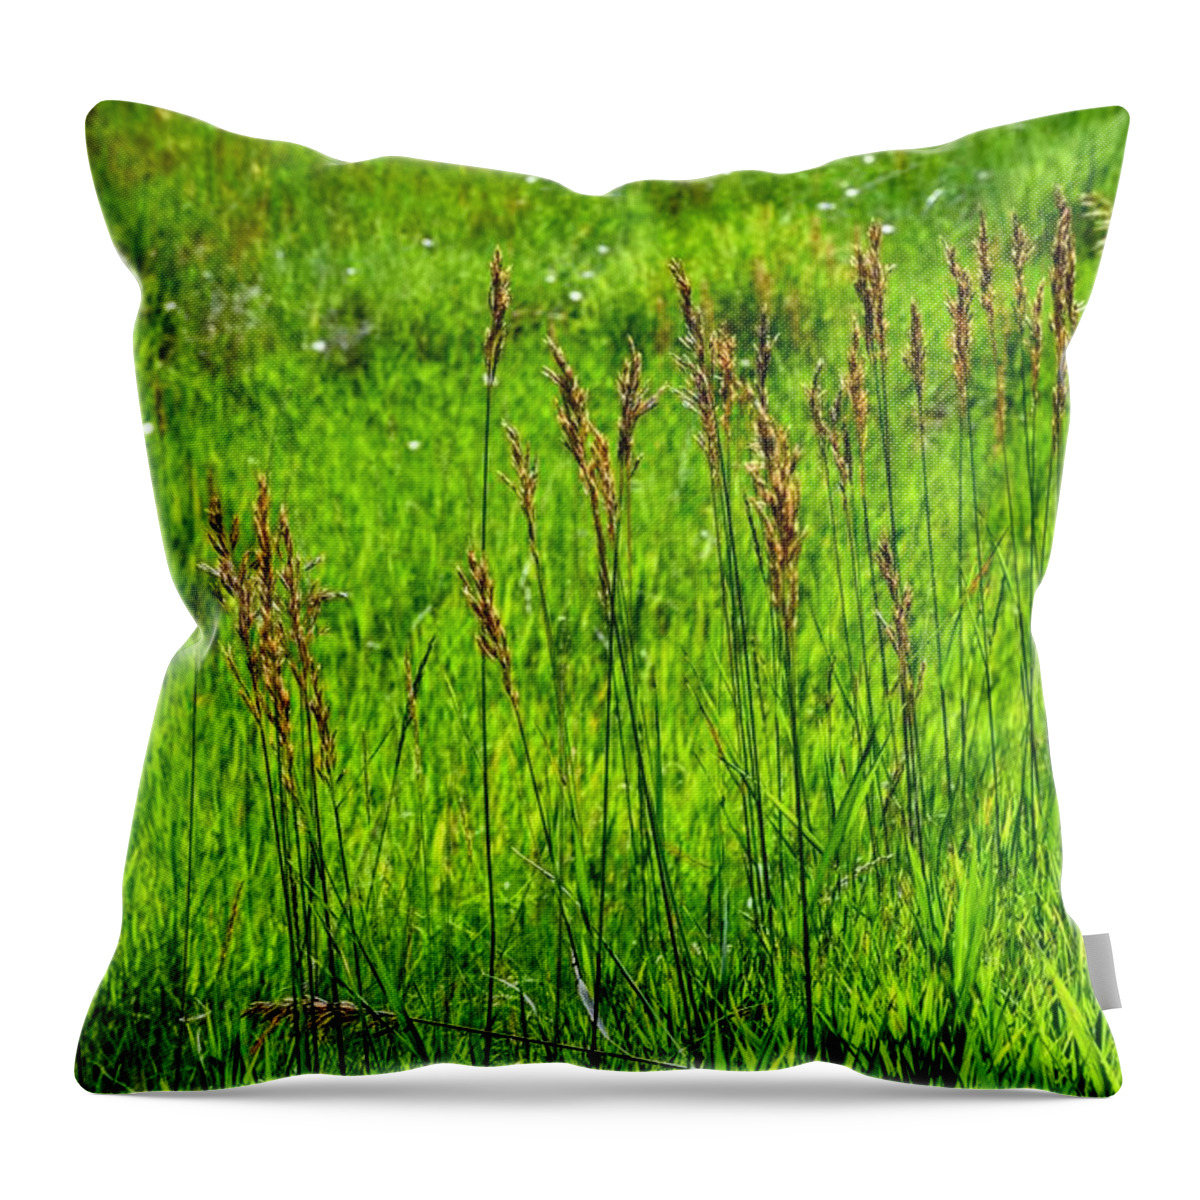 Grass Throw Pillow featuring the photograph Lush July by Michael Brungardt